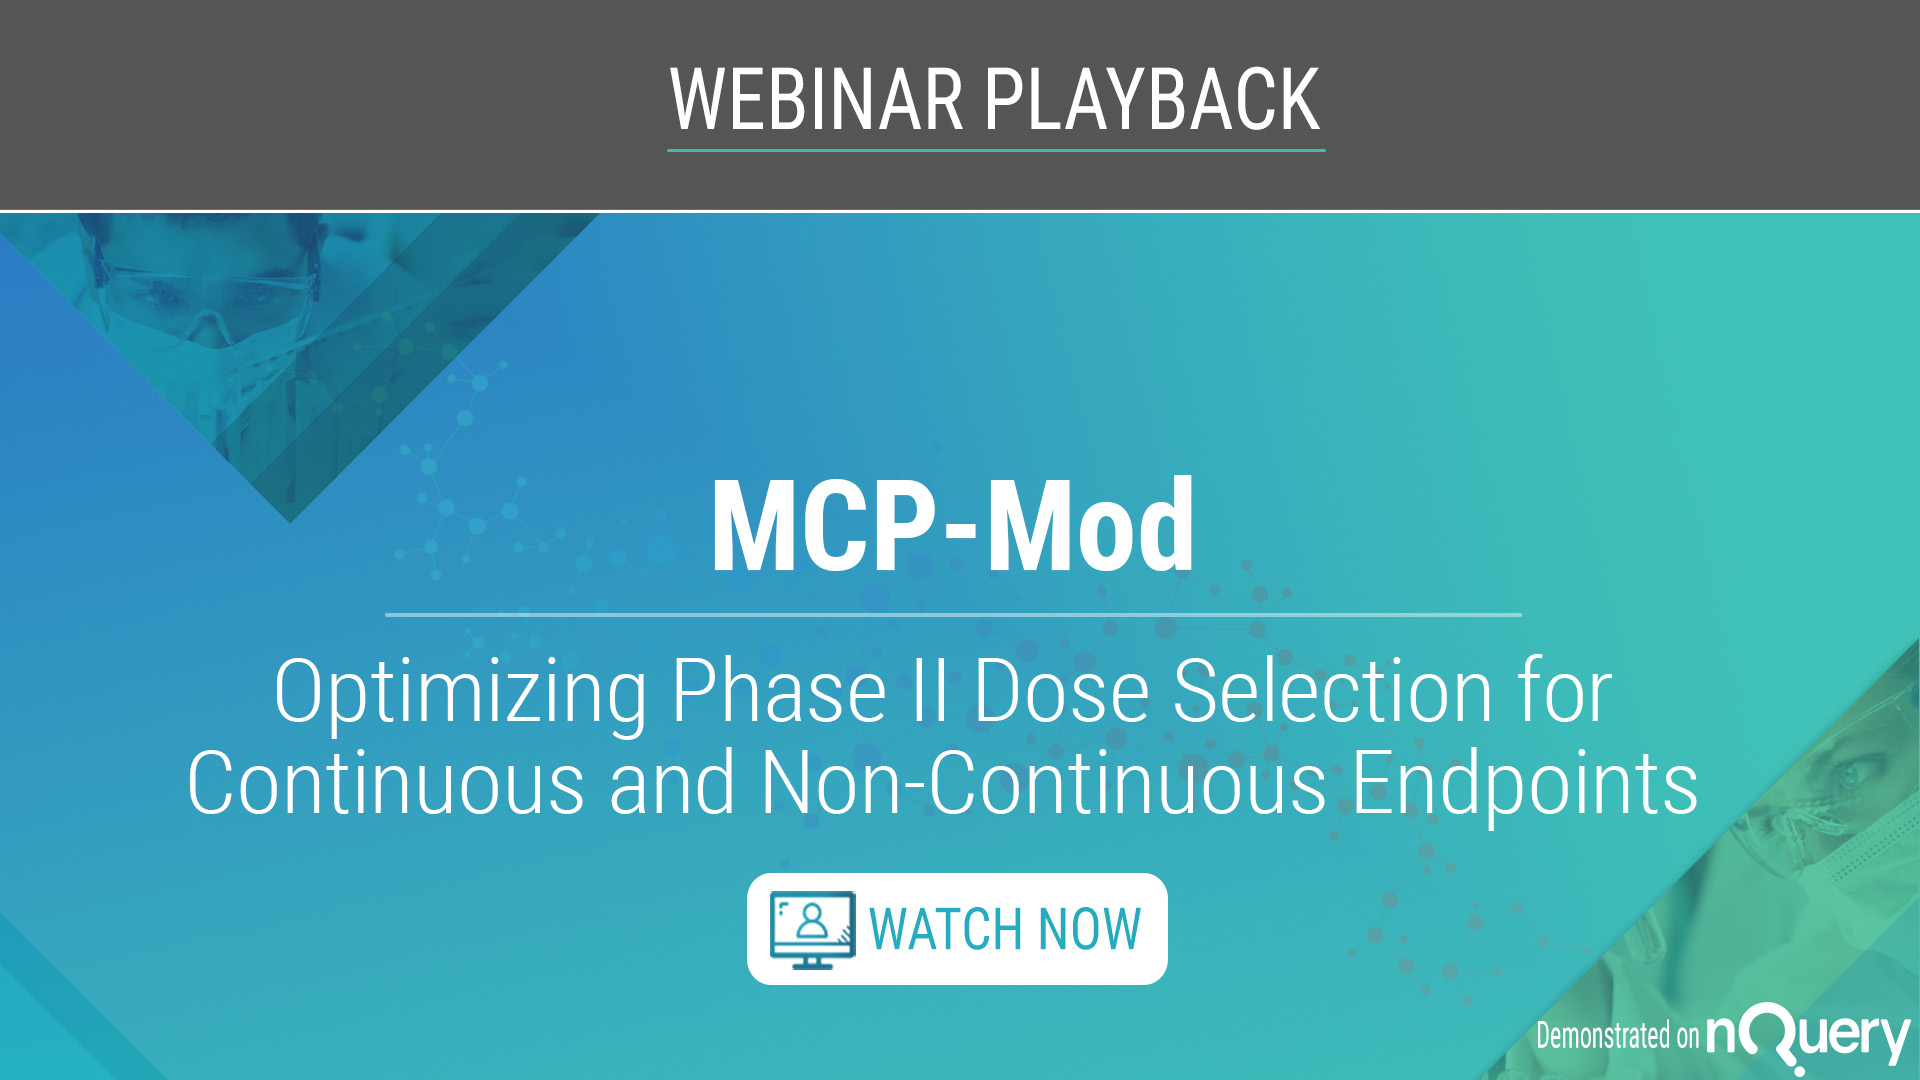 Mcp-mod-optimizing-phase-ii-dose-selection-for-continuous-and-non-continuous-endpoints-playback